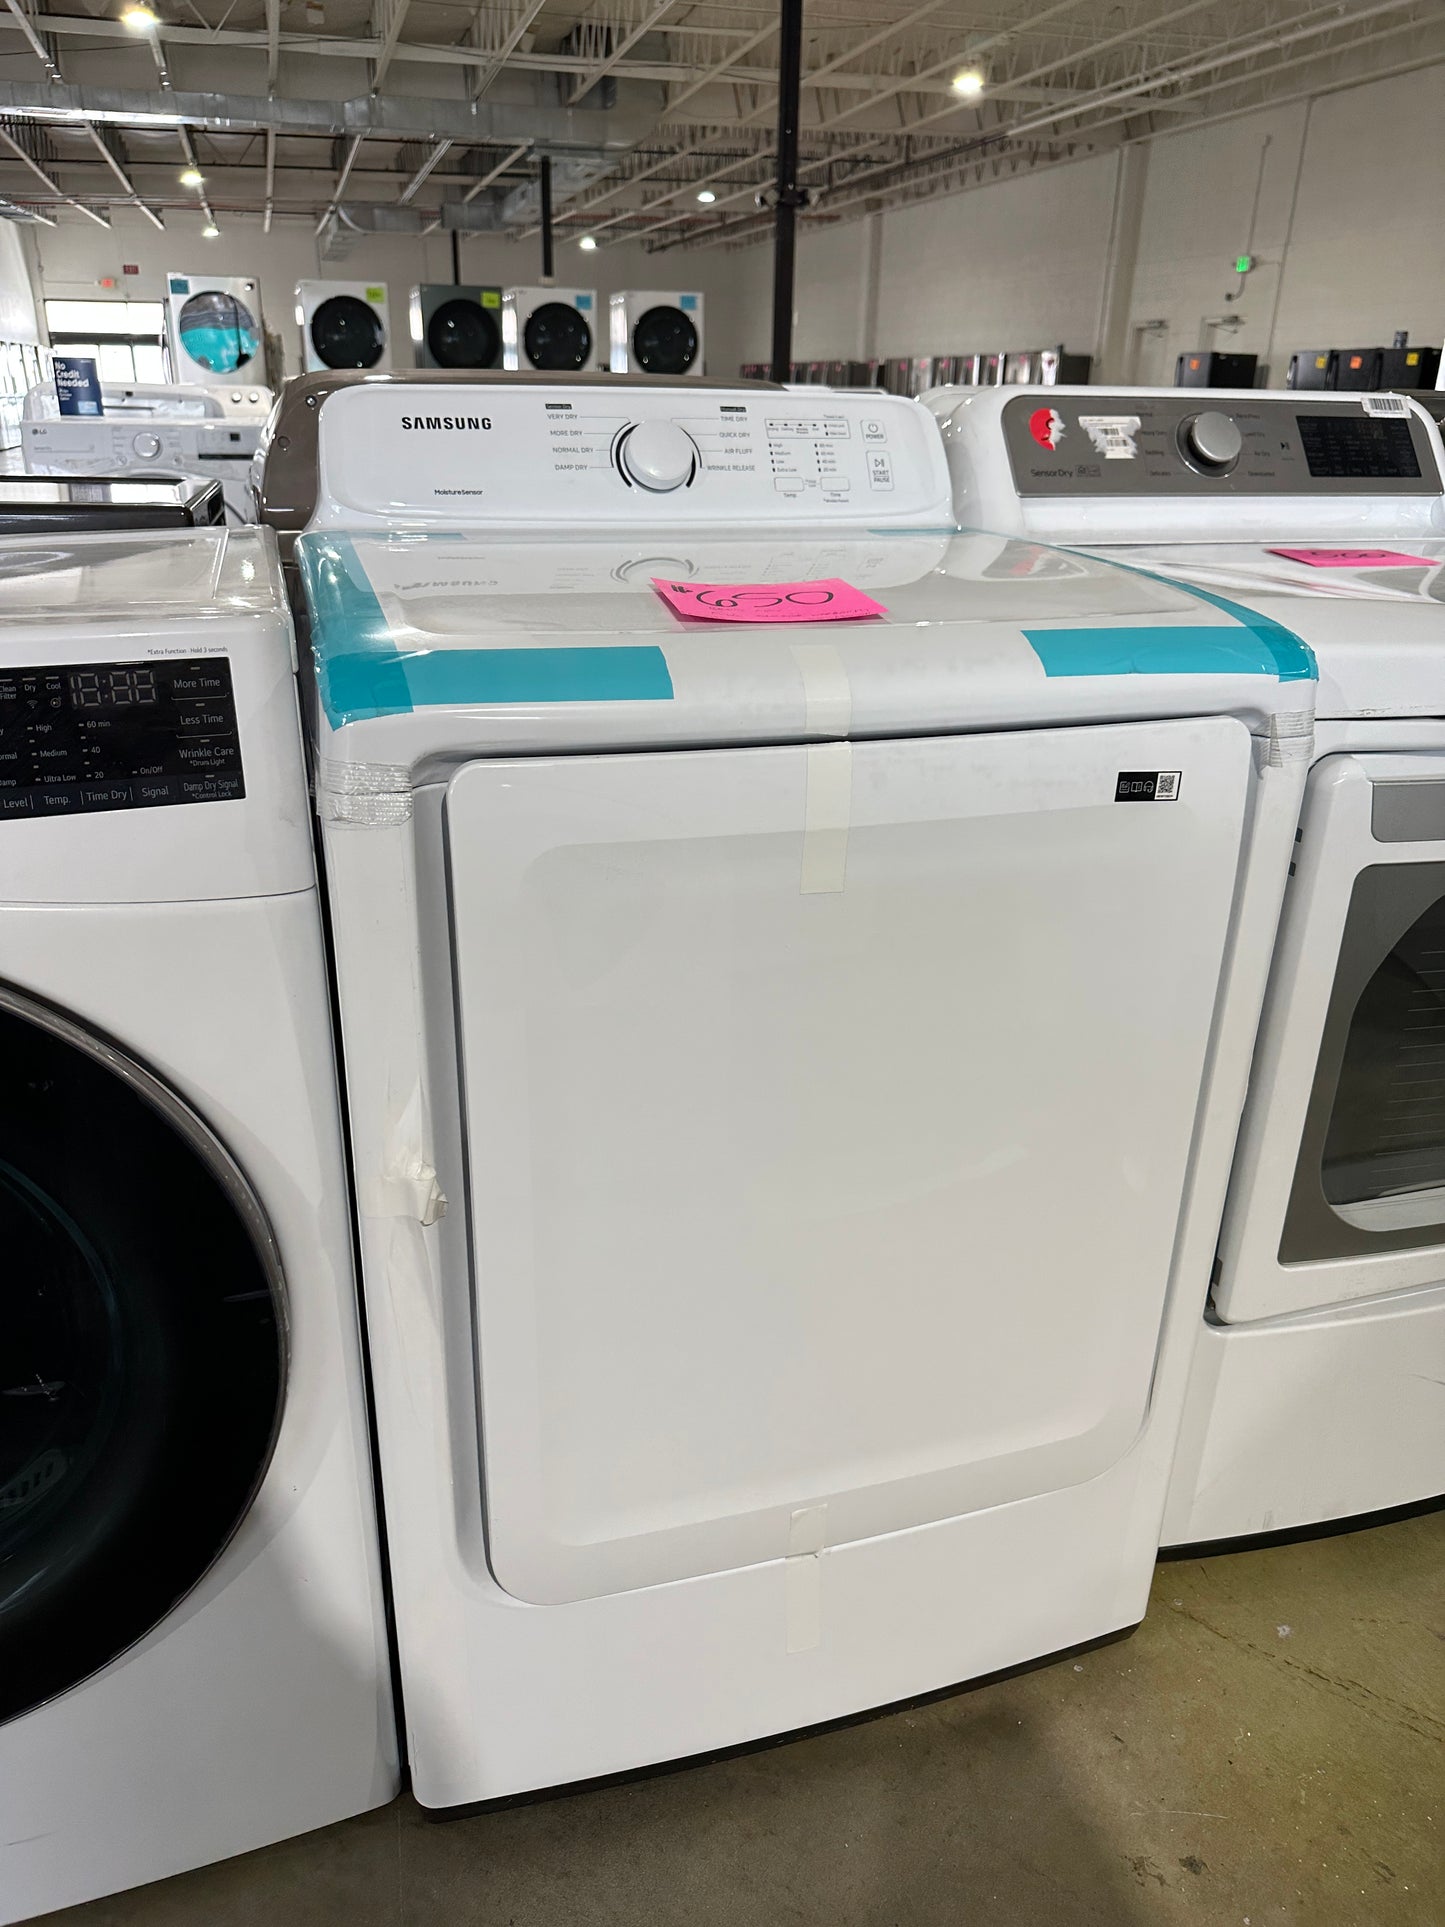 GREAT NEW SAMSUNG ELECTRIC DRYER - DRY11645S DVE41A3000W